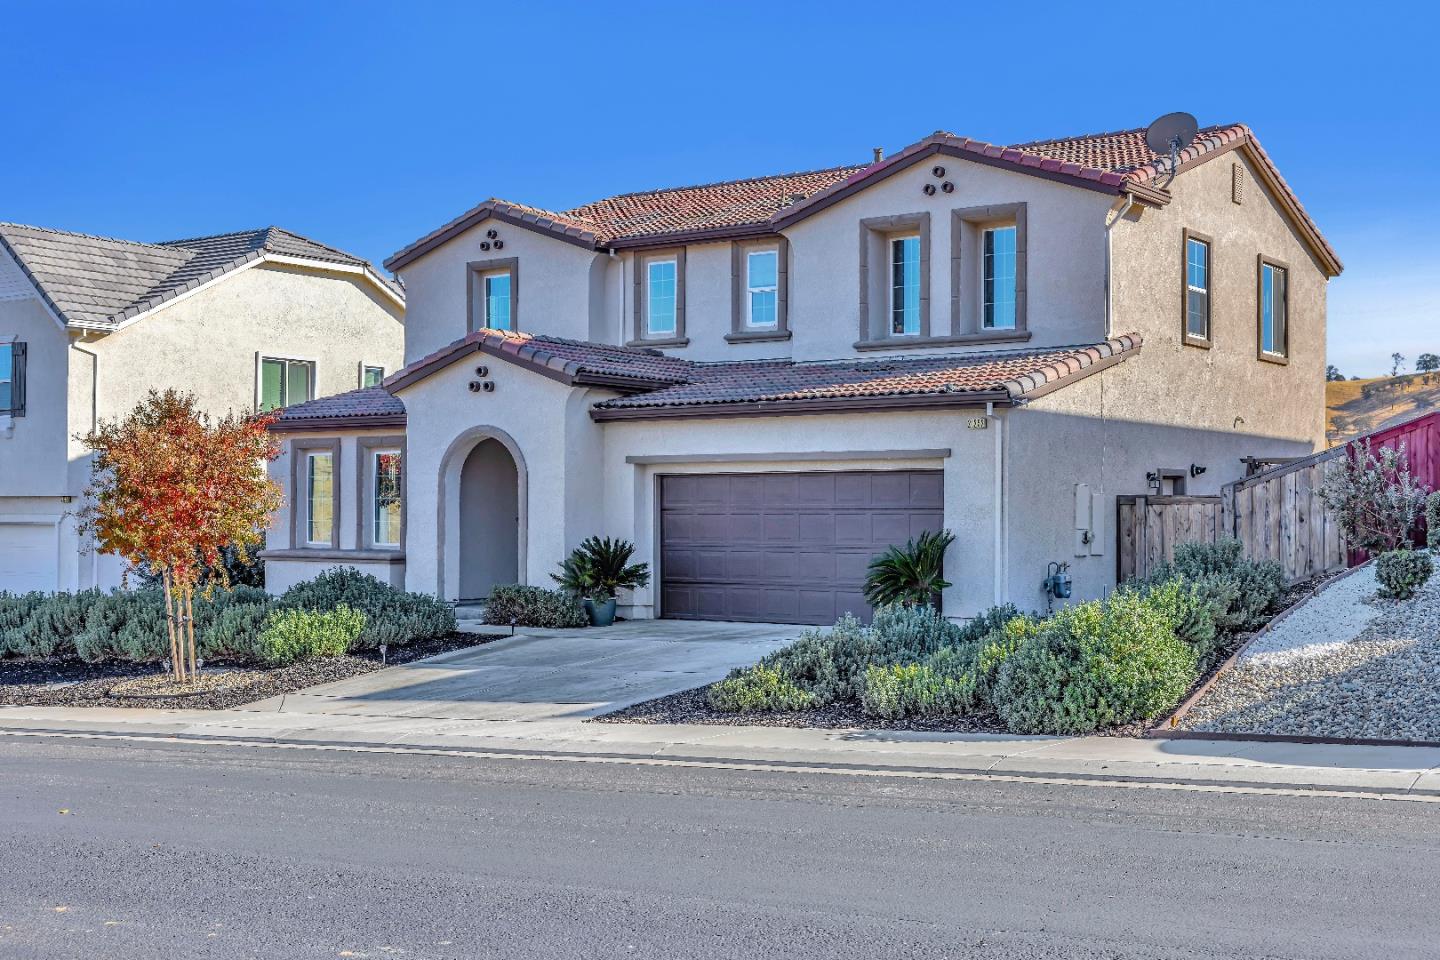 Photo of 21252 Grapevine Dr in Patterson, CA